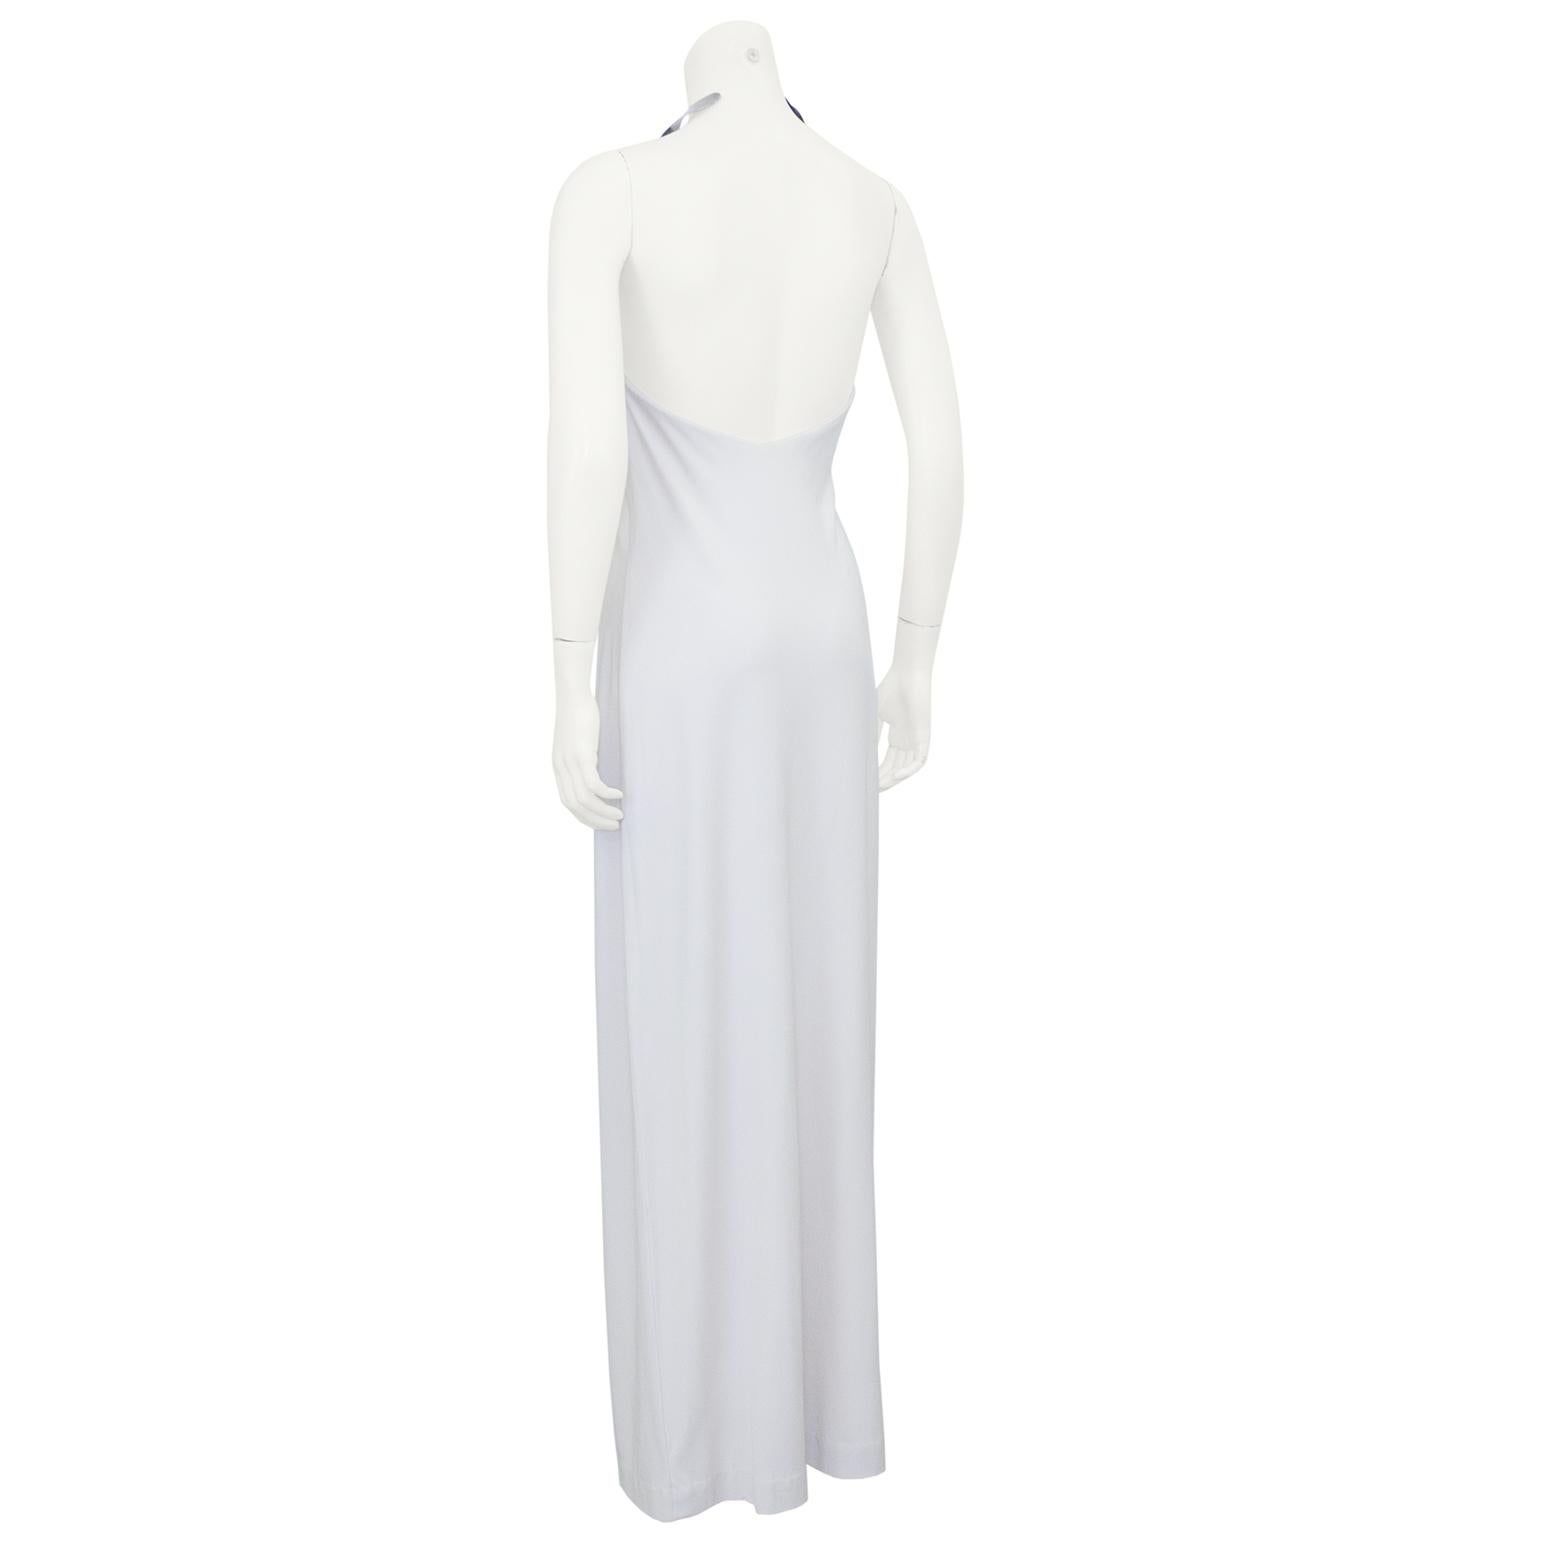 Spring 1994 Donna Karan Gown with Robert Lee Morris Silvertone Neckplate In Good Condition For Sale In Toronto, Ontario